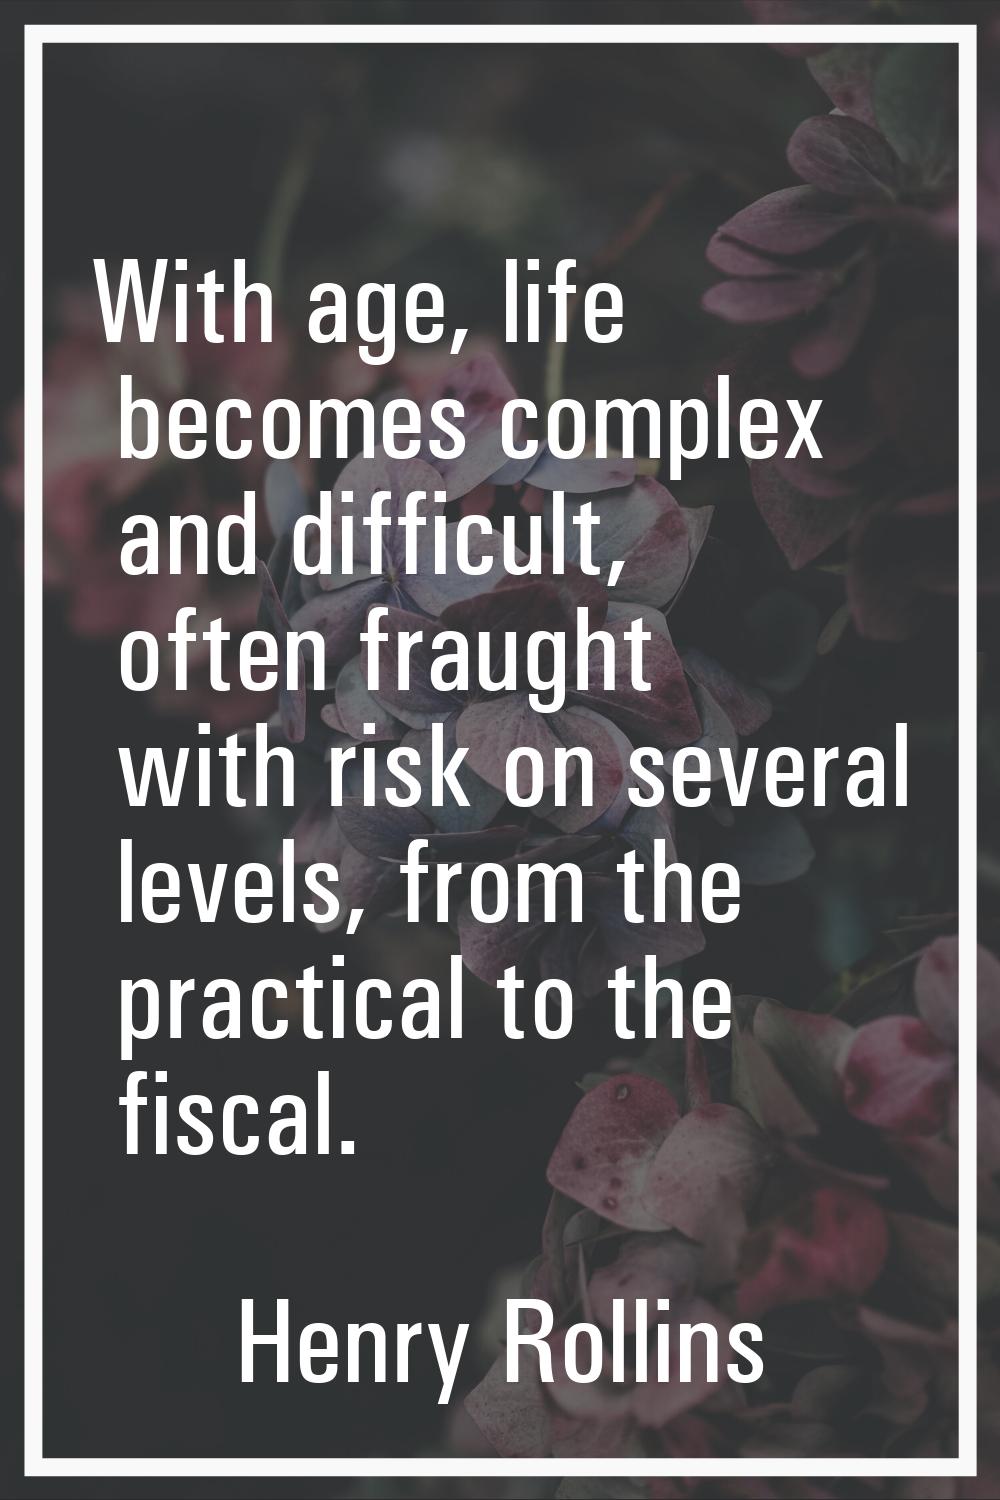 With age, life becomes complex and difficult, often fraught with risk on several levels, from the p